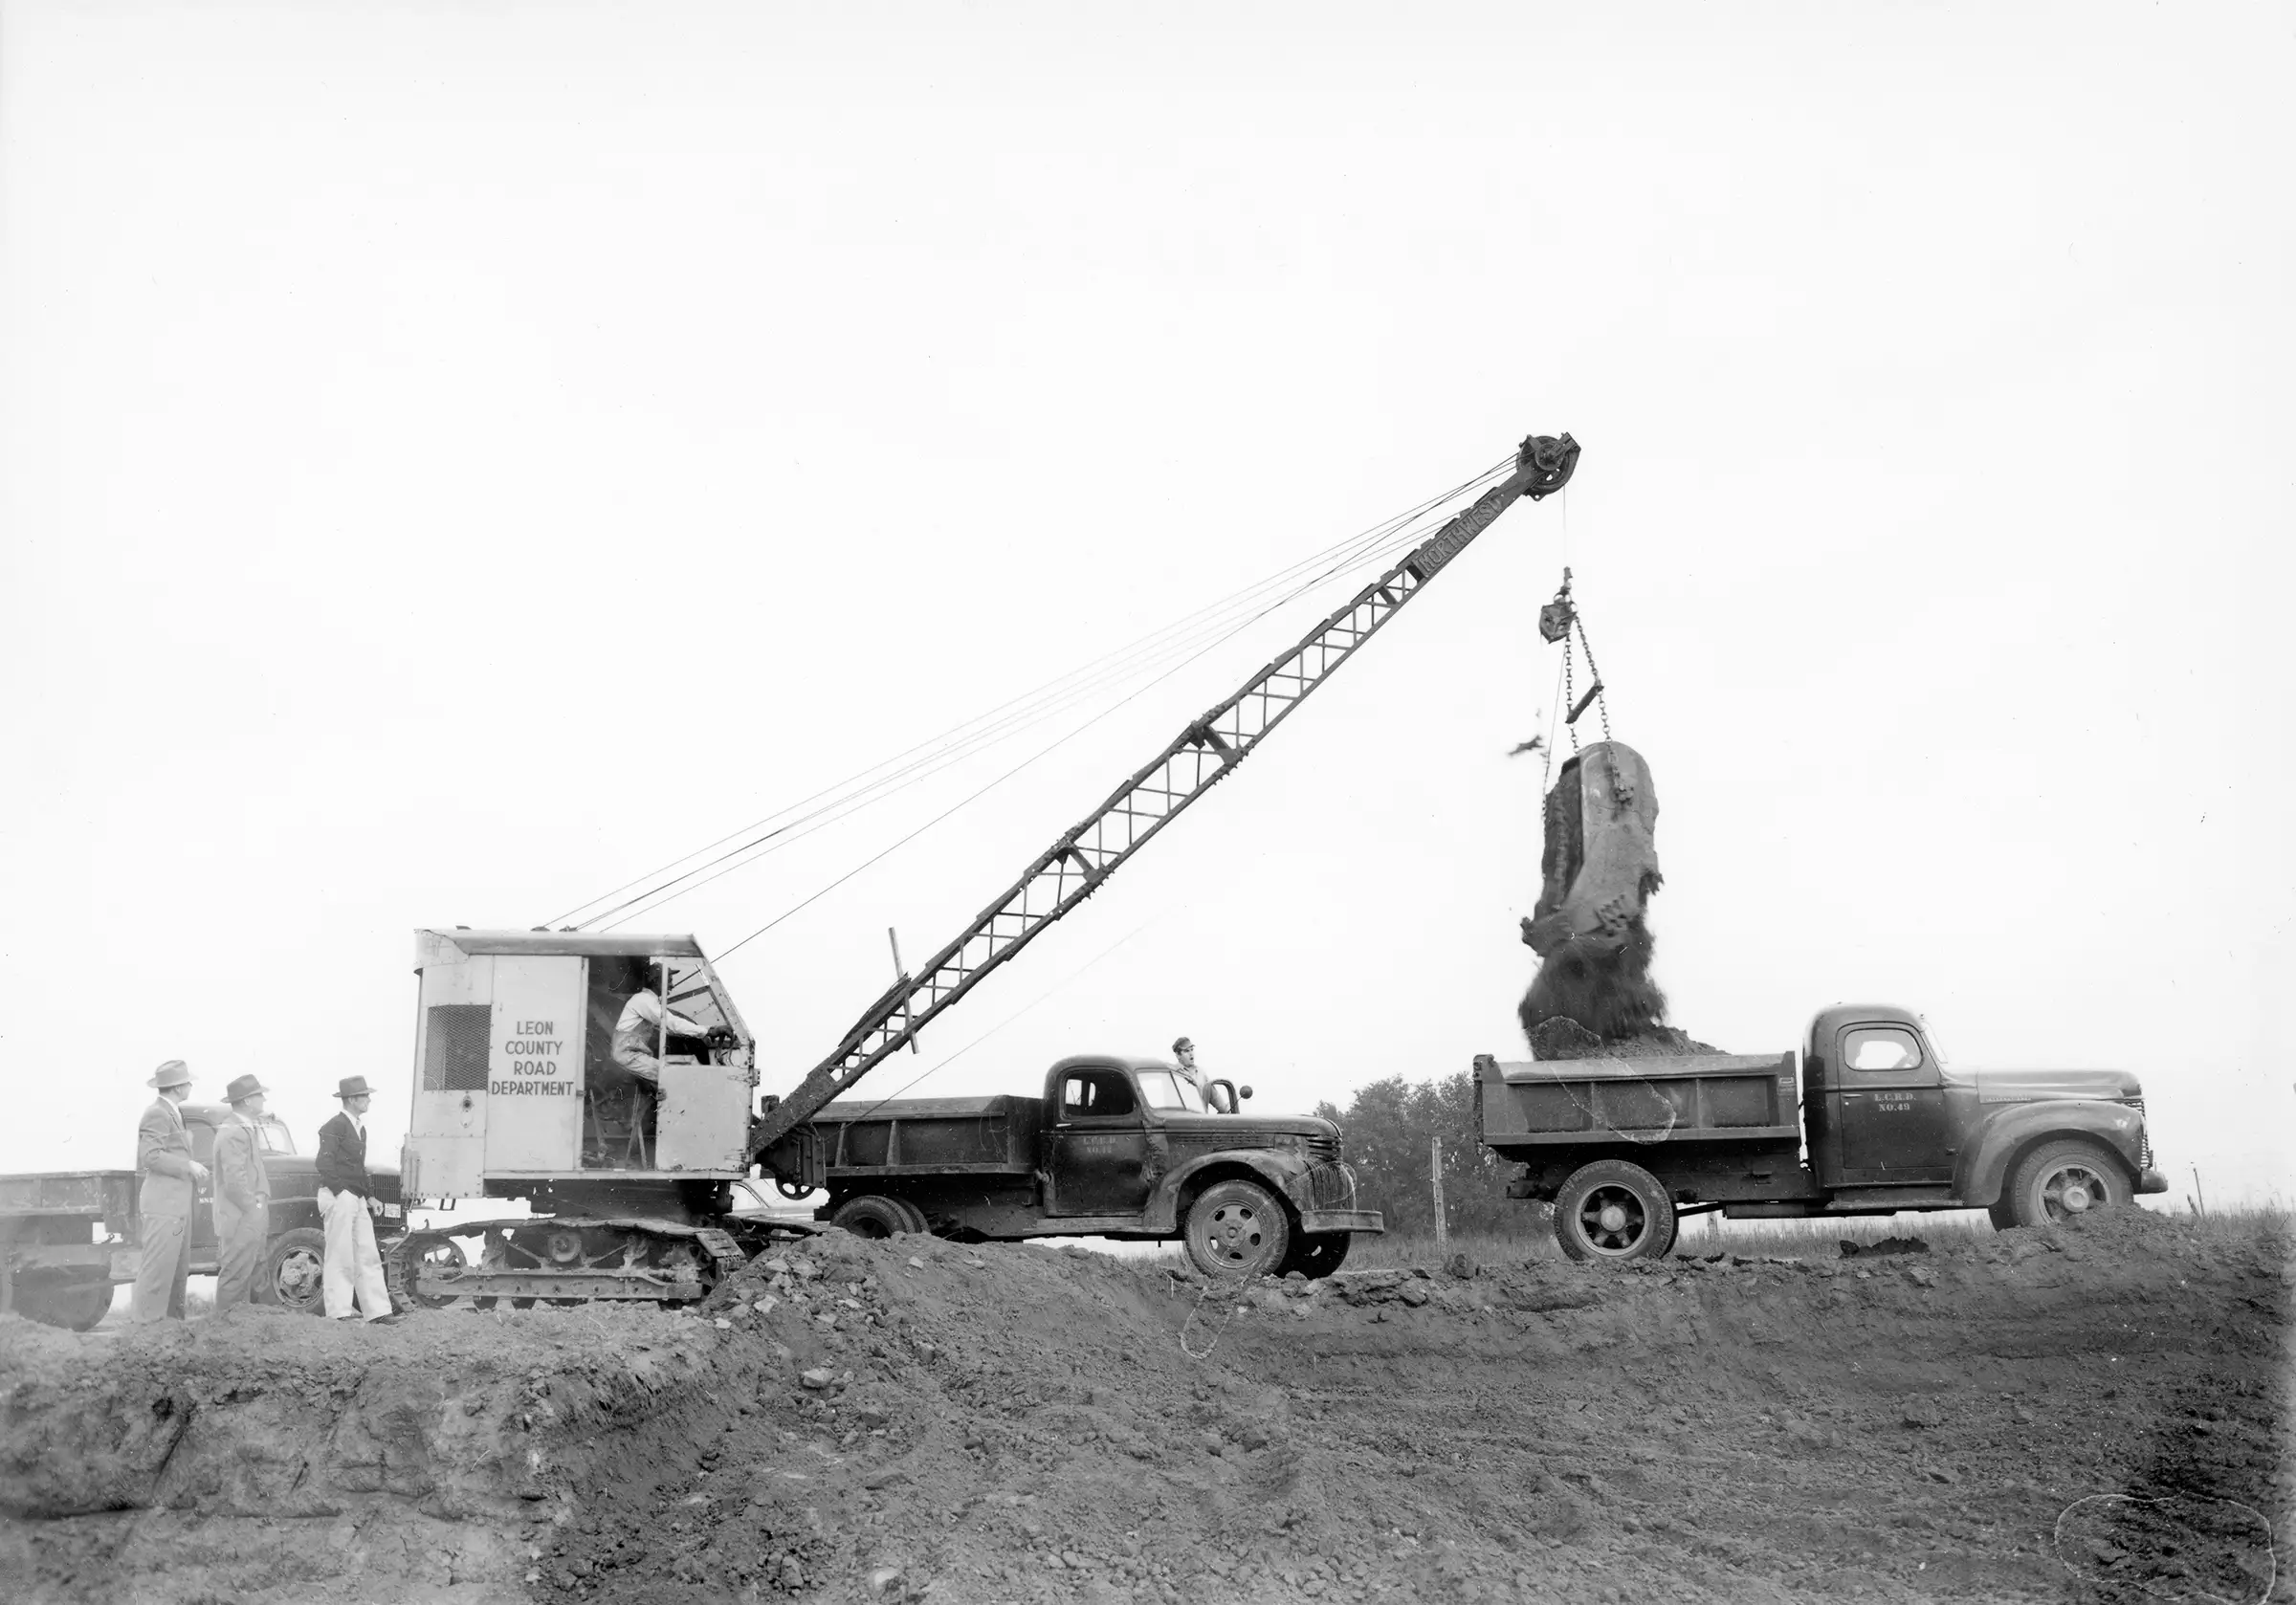 Archival Photo of Leon County Public Works Road Construction